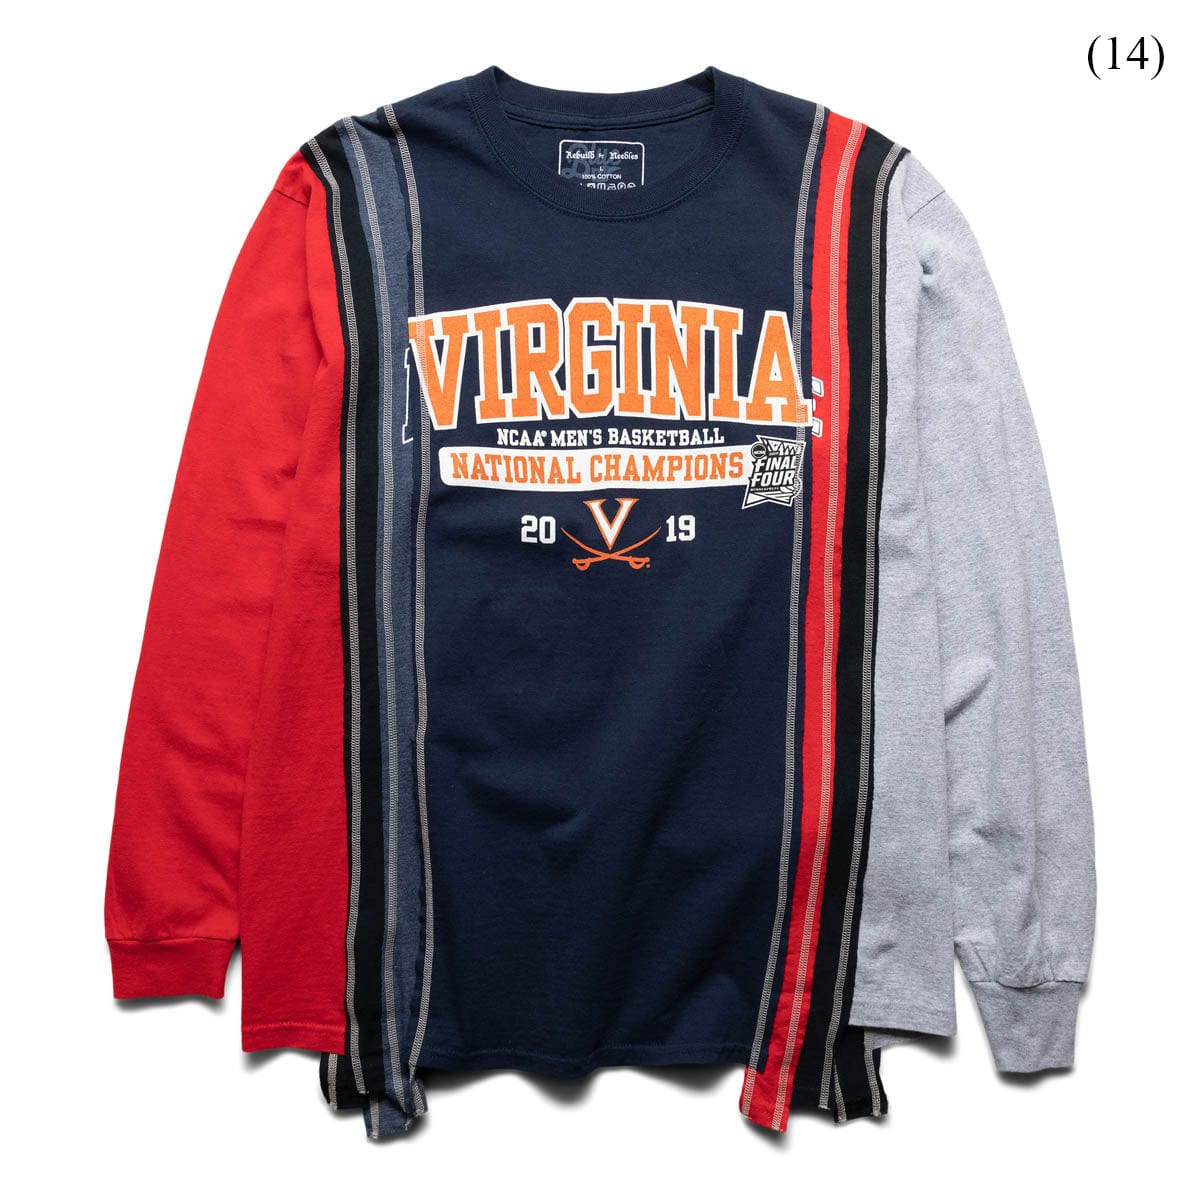 Needles 7 CUTS L/S TEE - Virginia COLLEGE SS22 (LARGE/MULTIPLE STYLES)